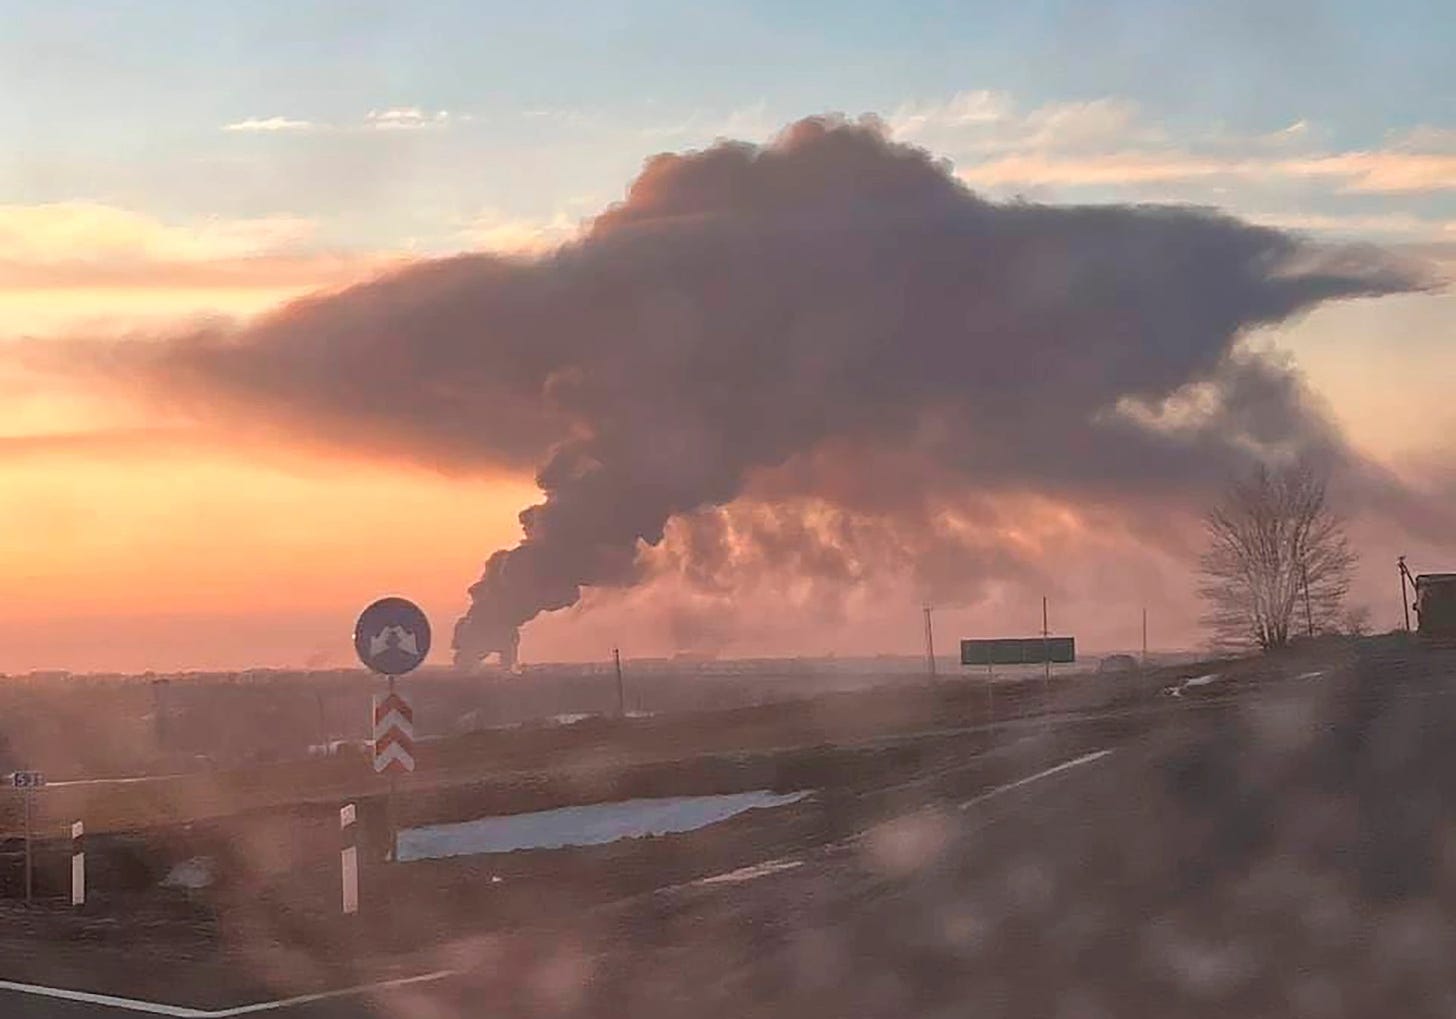 Dawn broke on a besieged Ukraine - picture shows Chuhuiv military airfield in Kharkiv outskirts burning after a Russian strike